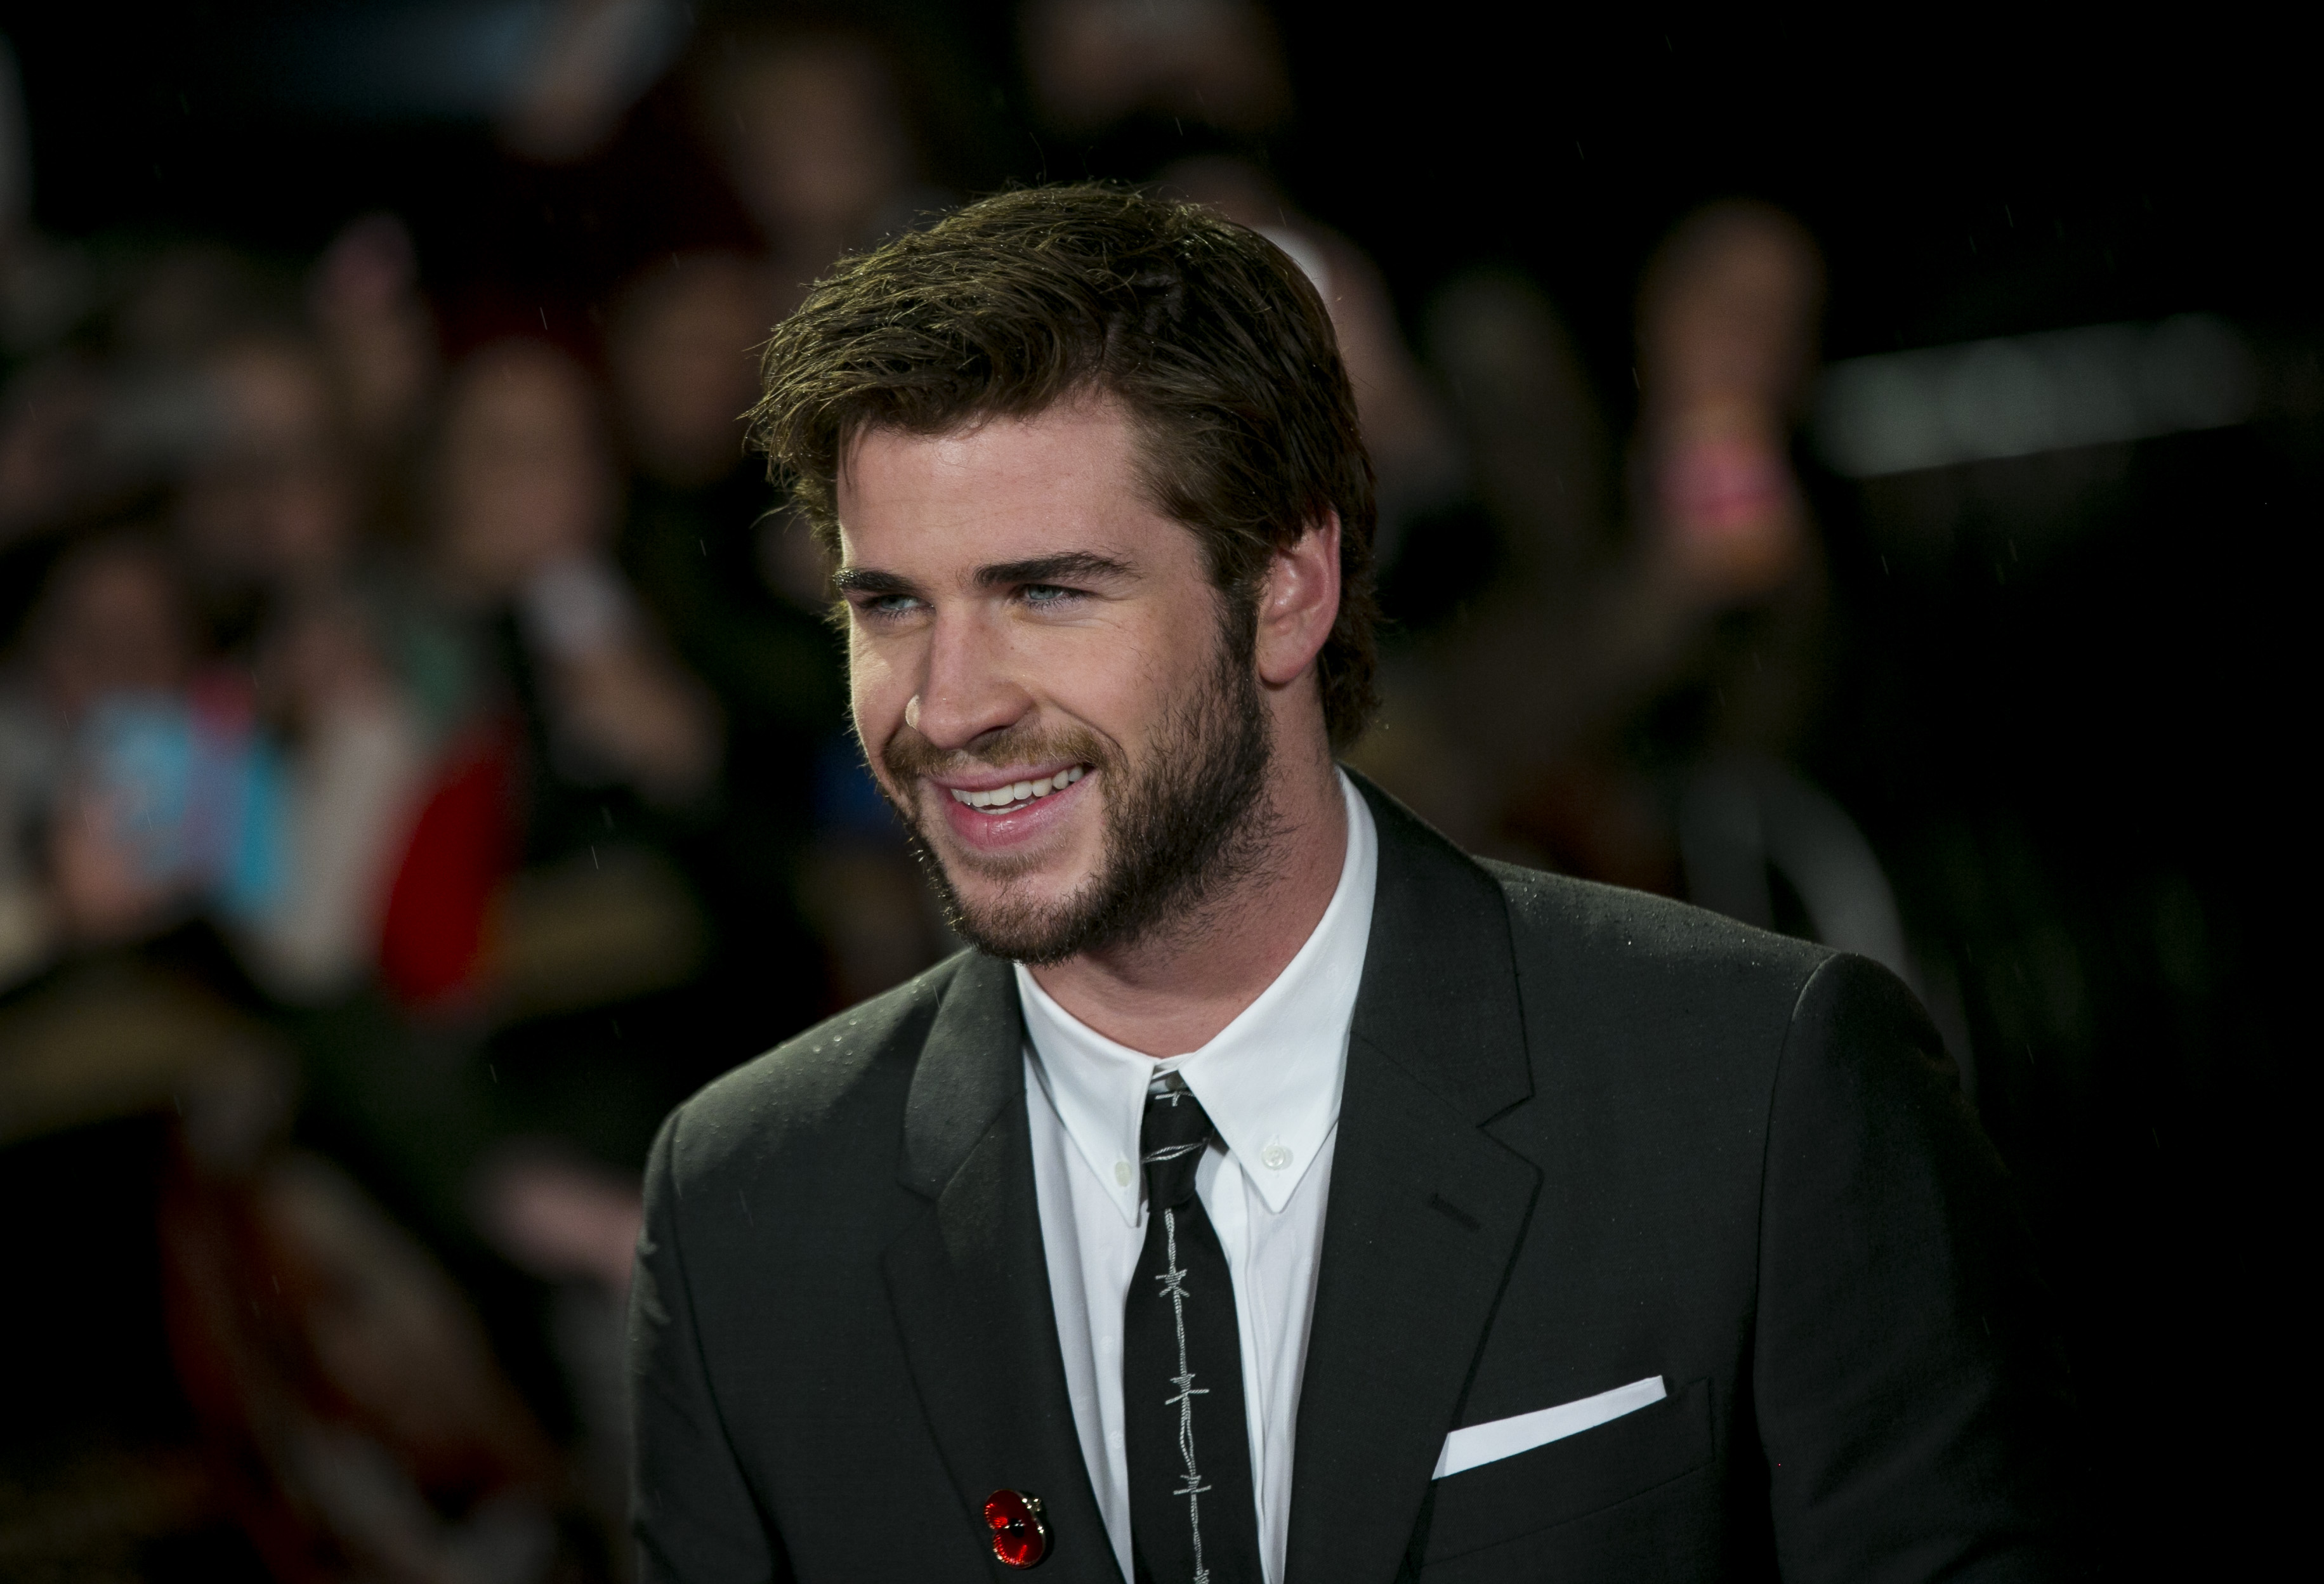 LONDON, UNITED KINGDOM - NOVEMBER 11: Liam Hemsworth attends the UK Premiere of "The Hunger Games: Catching Fire" at Odeon Leicester Square on November 11, 2013 in London, England. (Photo by John Phillips/UK Press via Getty Images) (John Phillips—Getty Images)